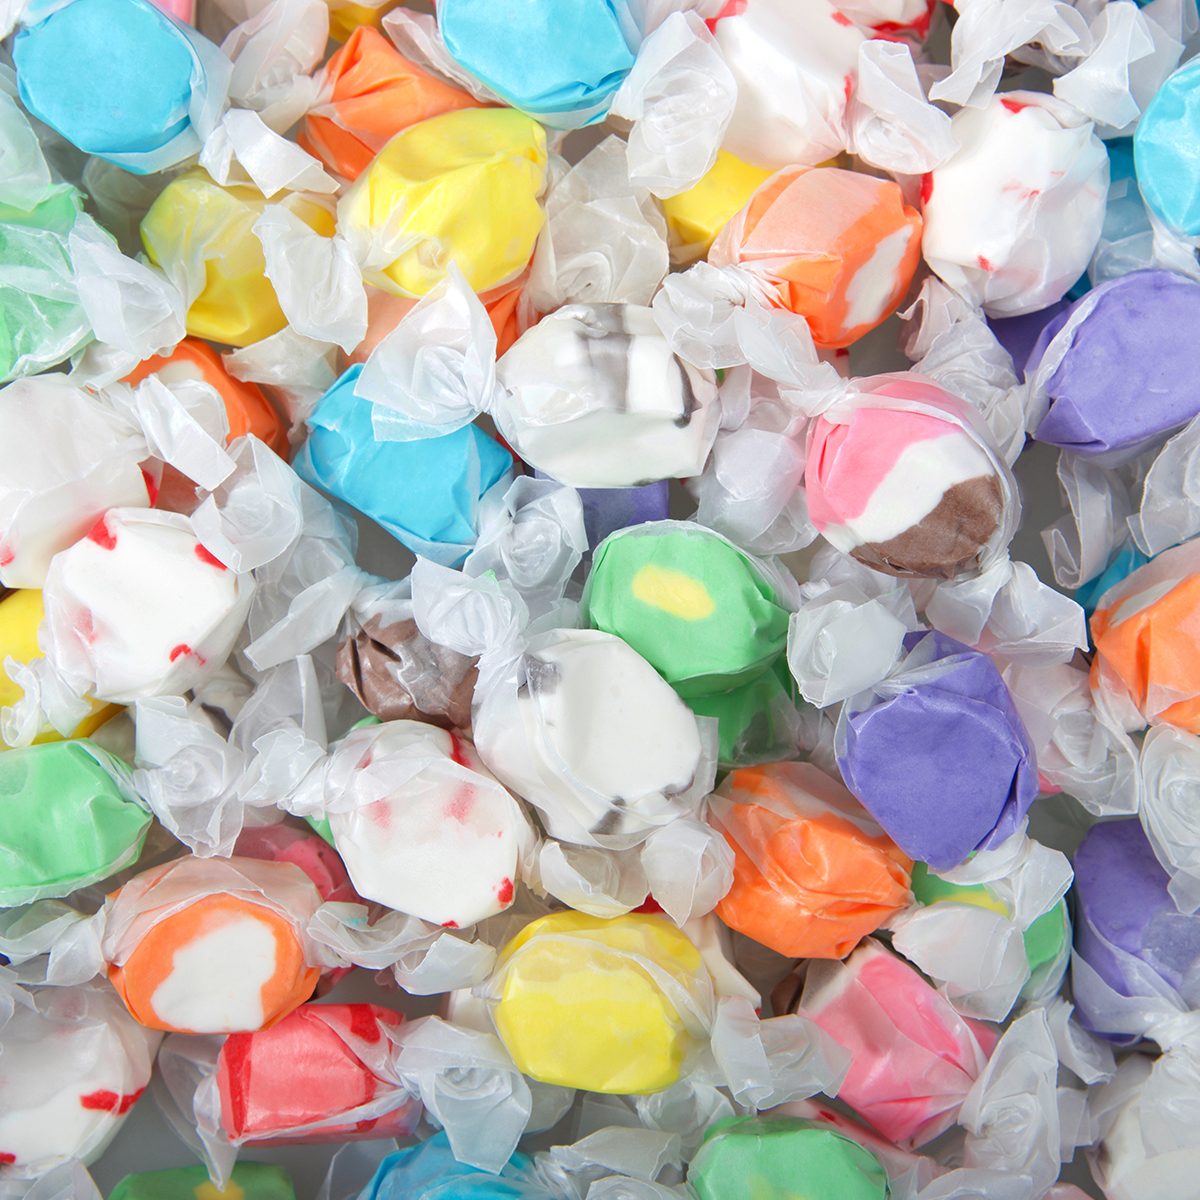 Background of salt water taffy in various flavors and colors wrapped in white transparent paper. Salt water taffy is sold widely on the boardwalks in the U.S. and Canada.; Shutterstock ID 1312539896; Job (TFH, TOH, RD, BNB, CWM, CM): Taste of Home